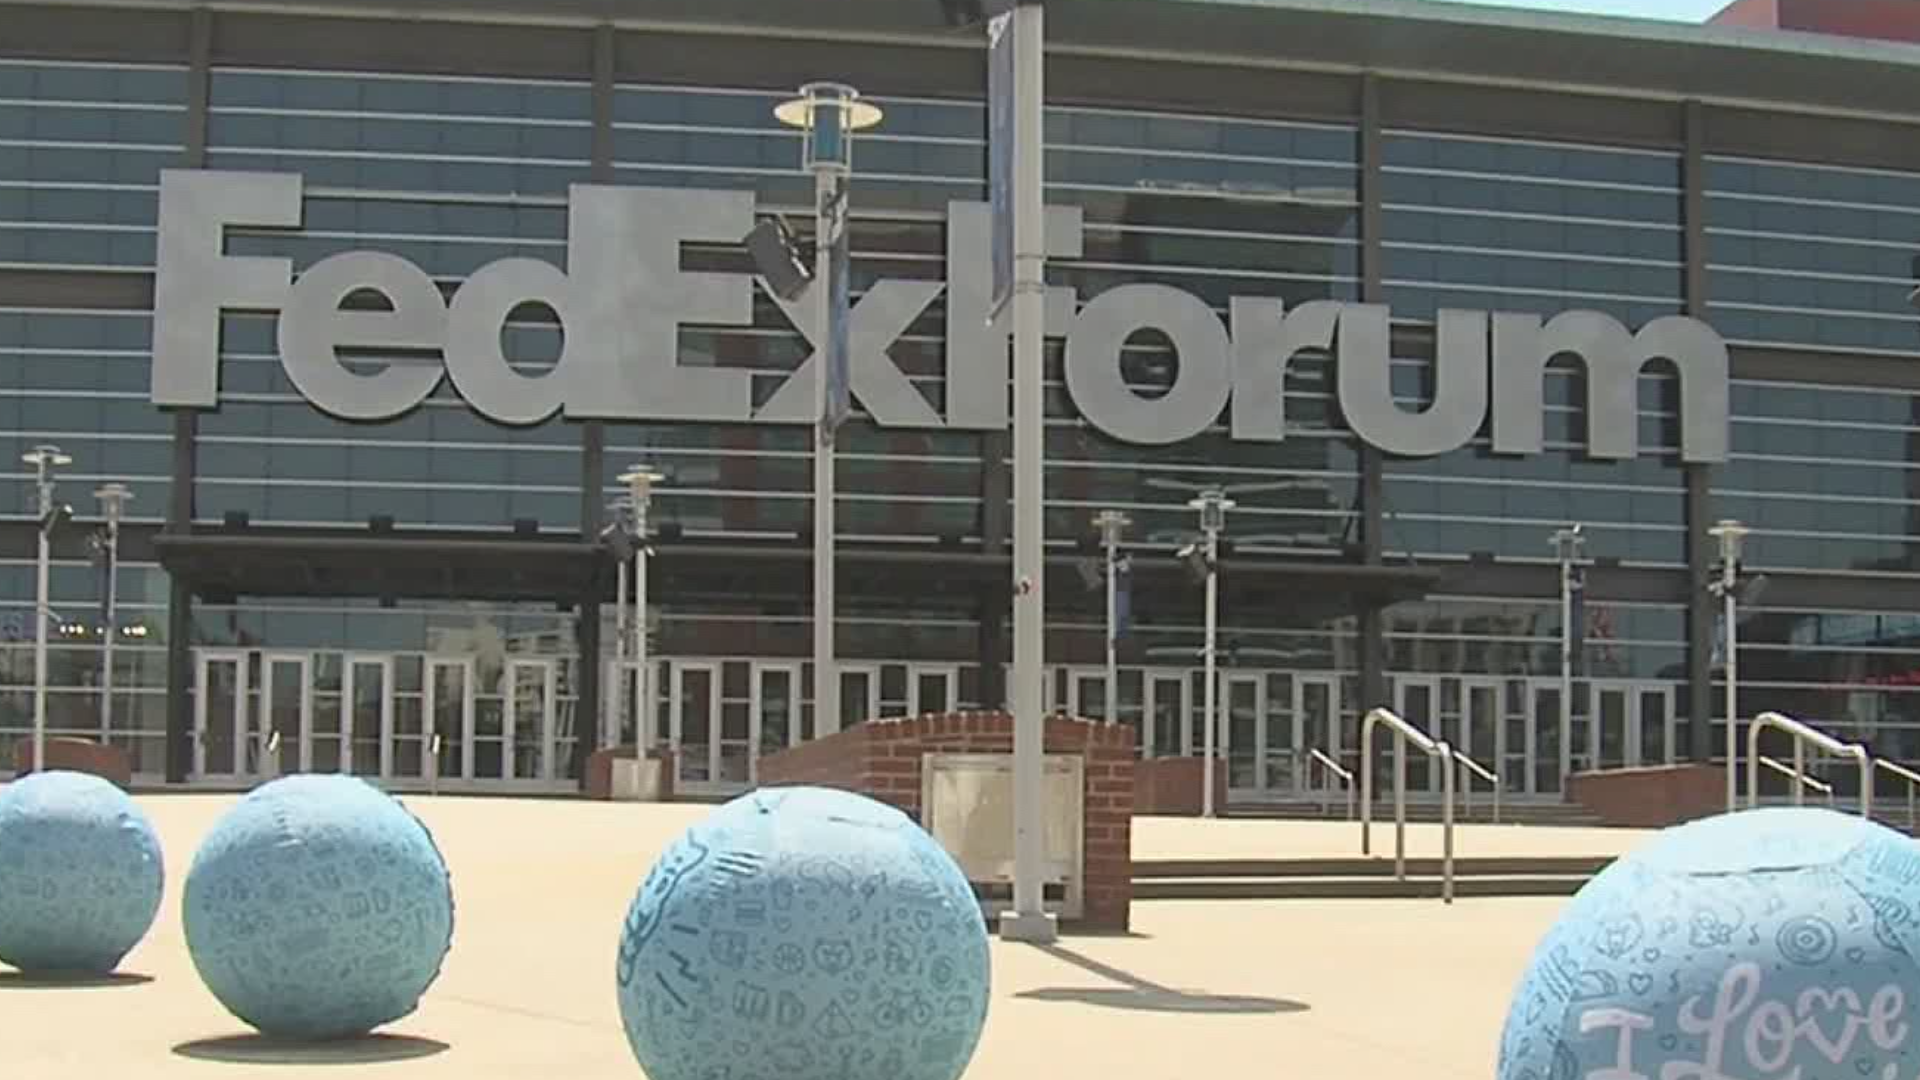 Fedex Forum has done a little touch up to their plaza that will bring a little joy to Memphis.